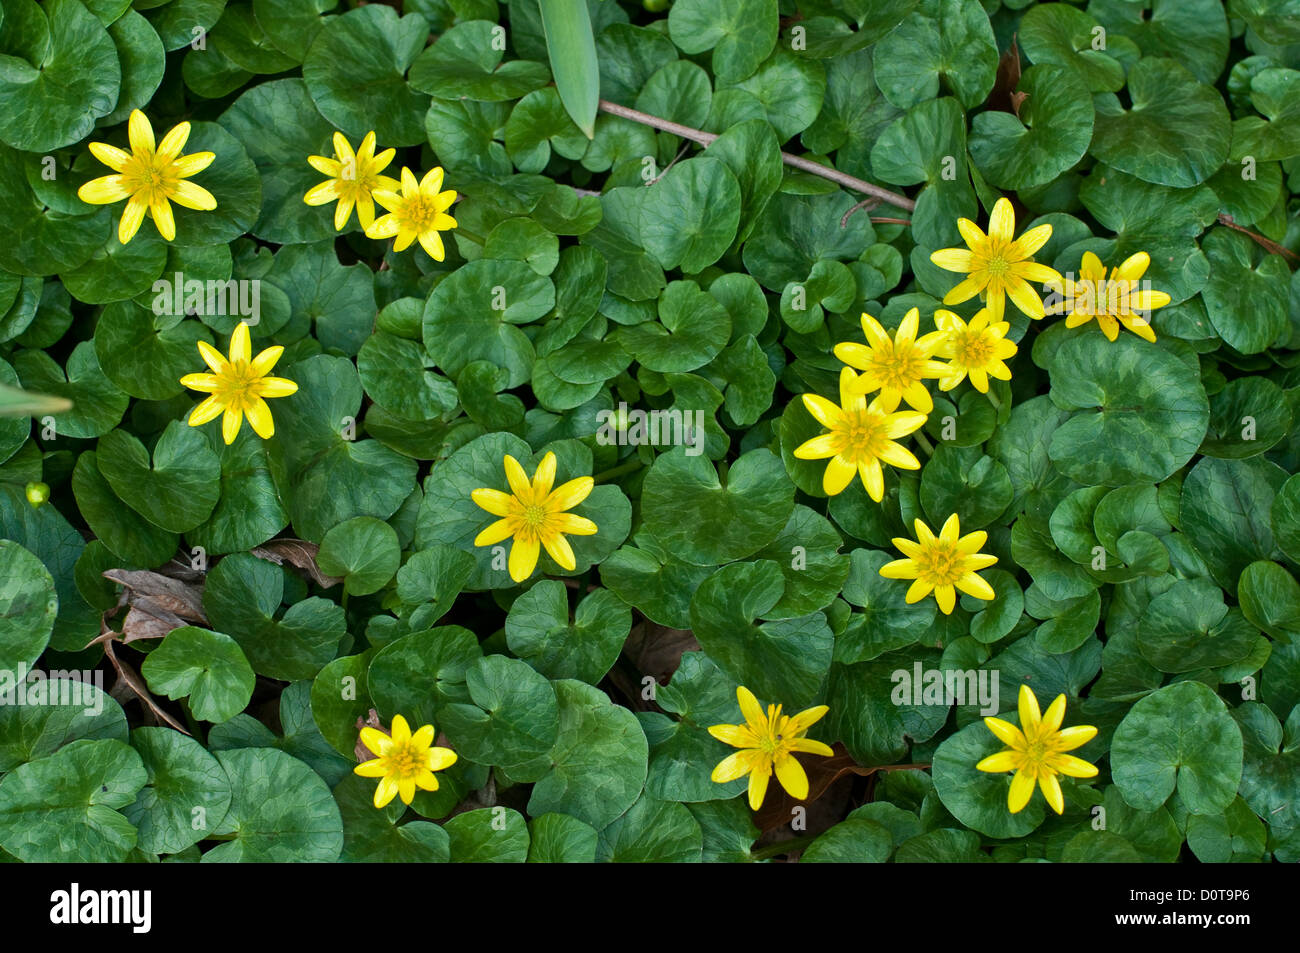 Lesser celandine (Ranunculus ficaria) flowers and foliage, a spring wildflower. Stock Photo